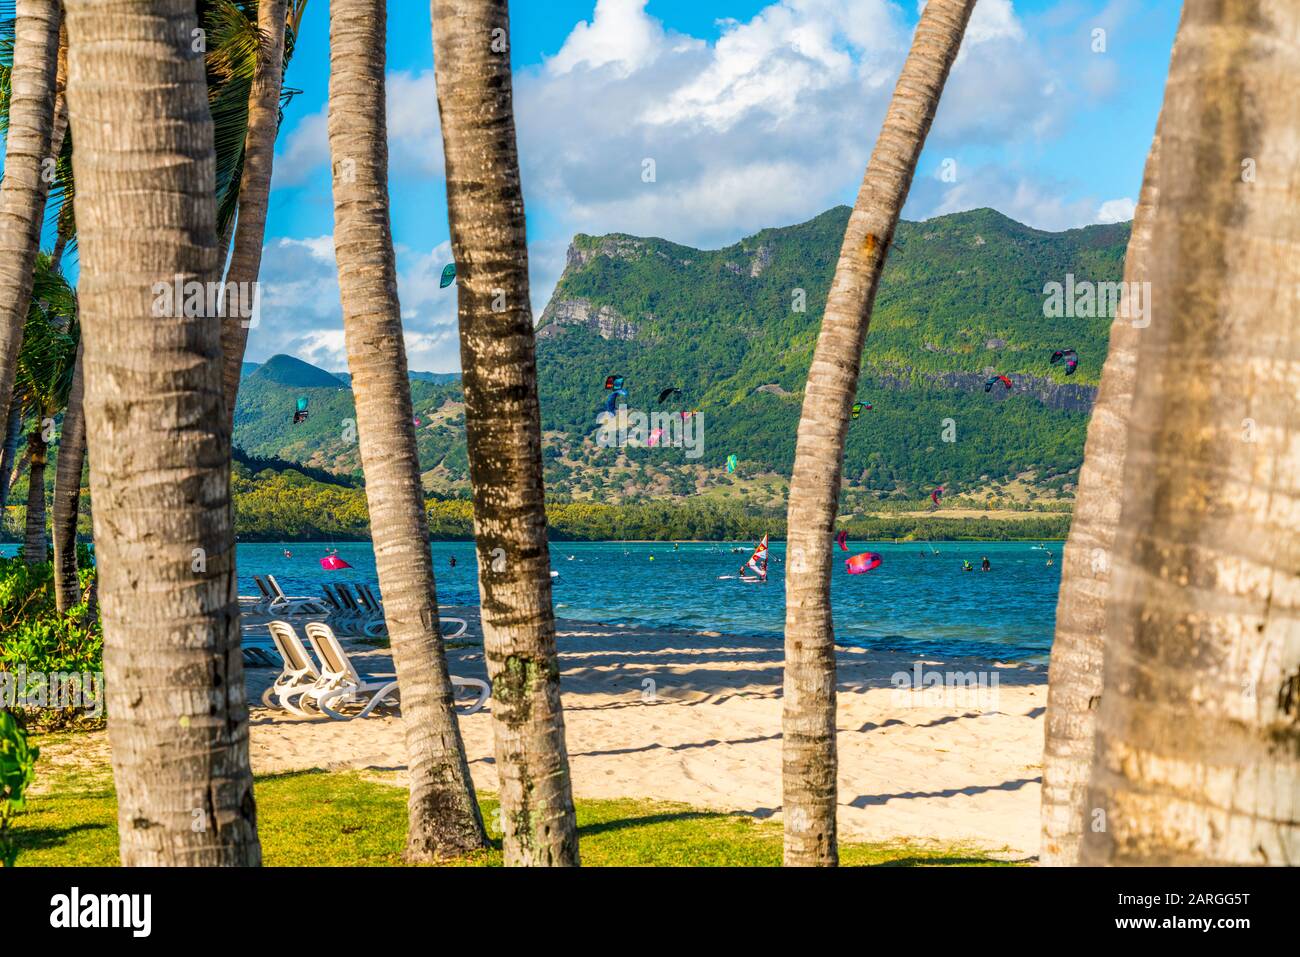 Kitesurf in the ocean seen from tropical palm-fringed beach, Le Morne Brabant, Black River district, Mauritius, Indian Ocean, Africa Stock Photo